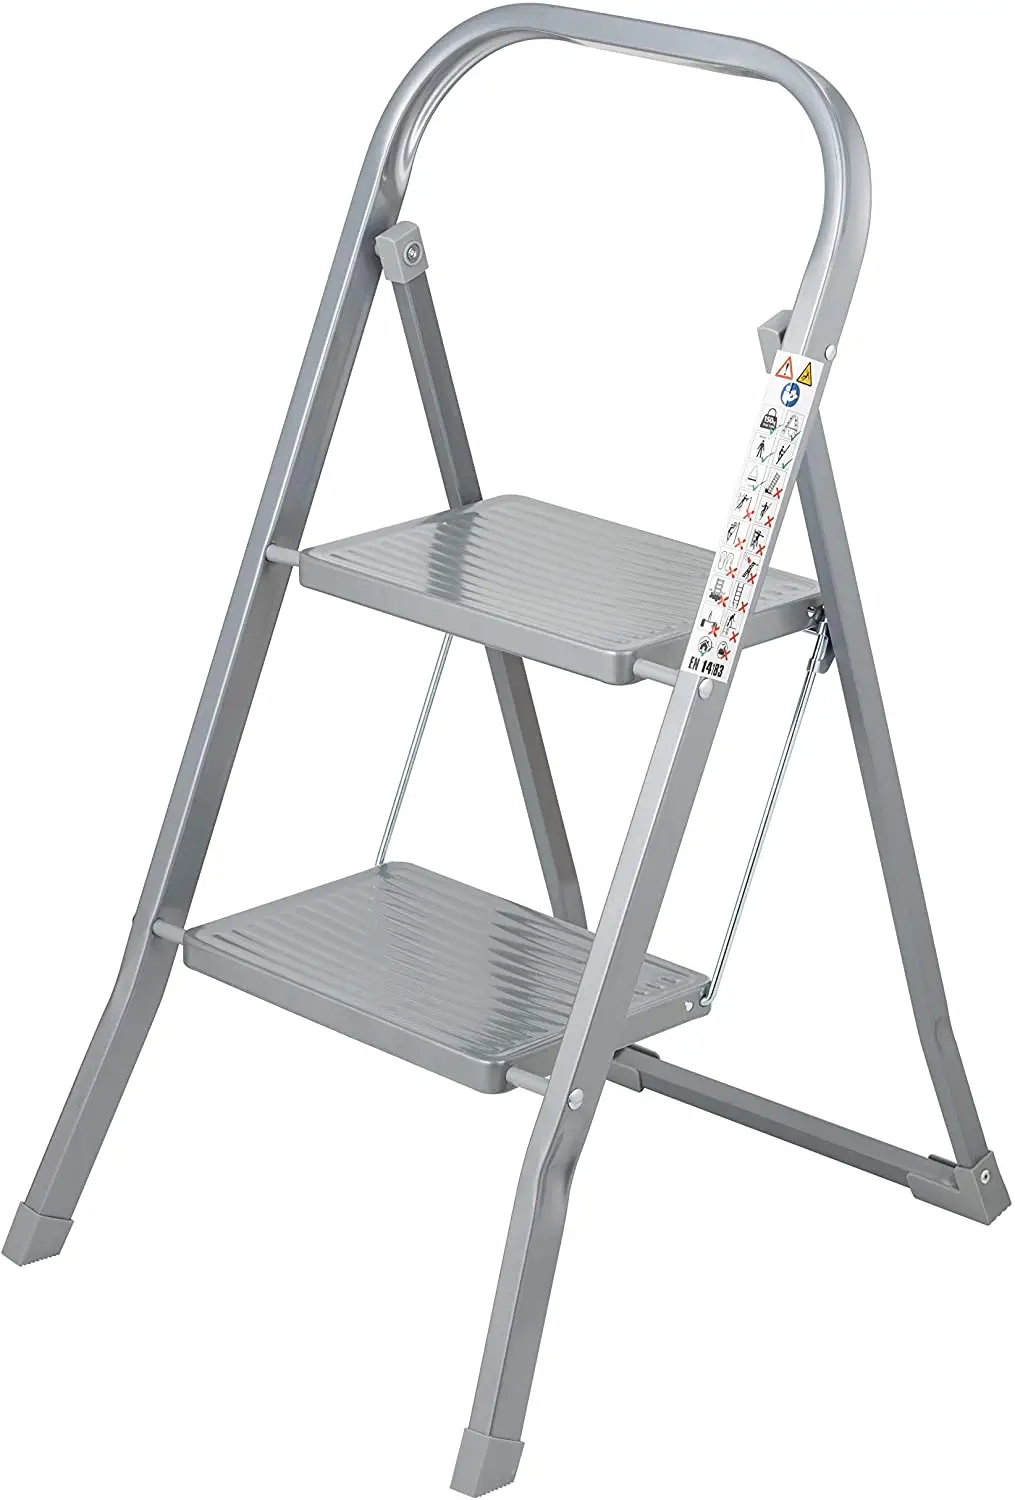 2 Step Steel Ladder - Anti Slip Feet - Easy to Store Foldable Design - Ideal for Home/Kitchen manufacturer